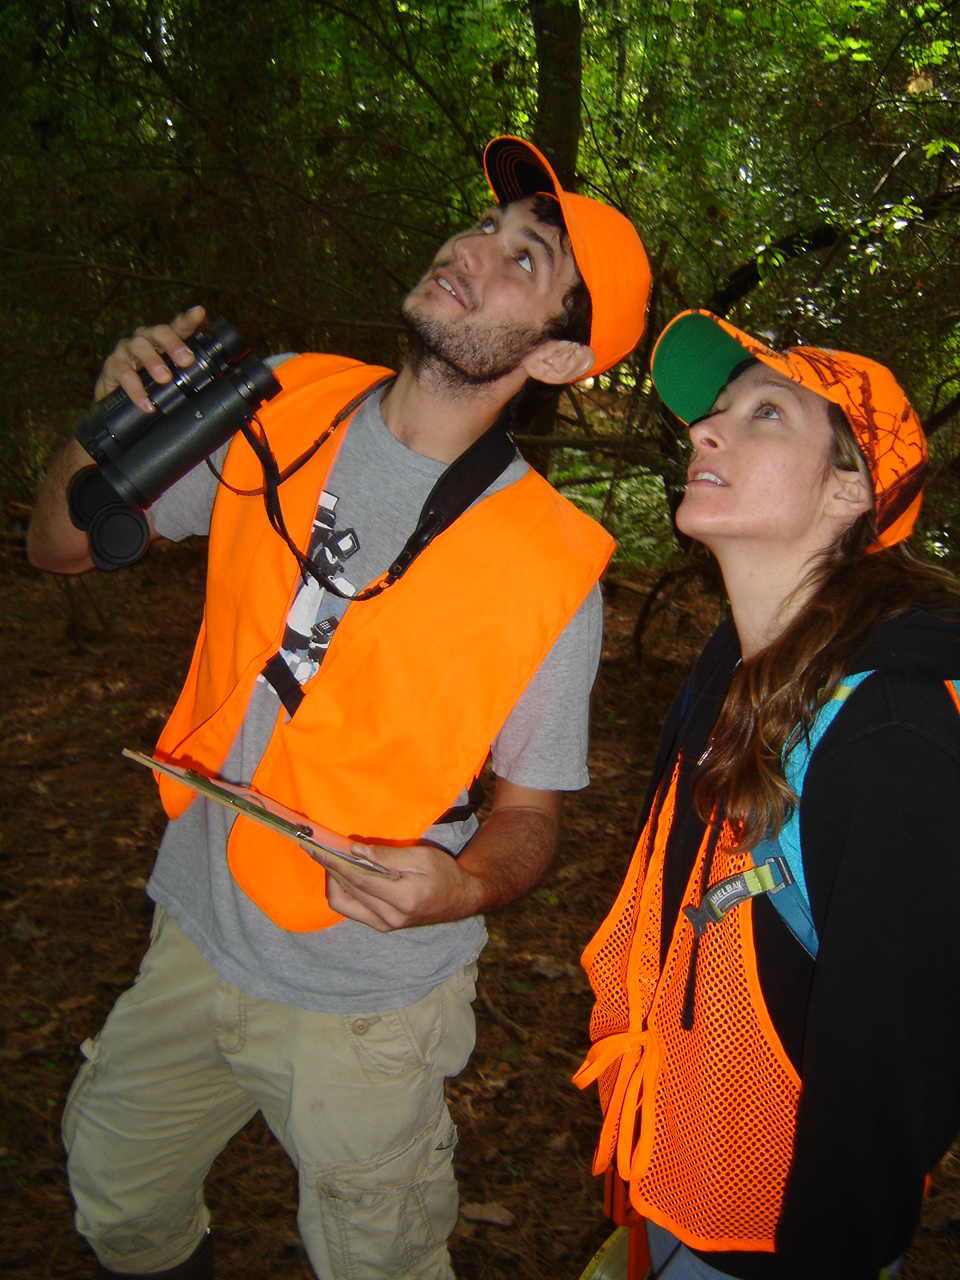 Photo in forest of bird surveyers Andrew Arnold and Joy Miller